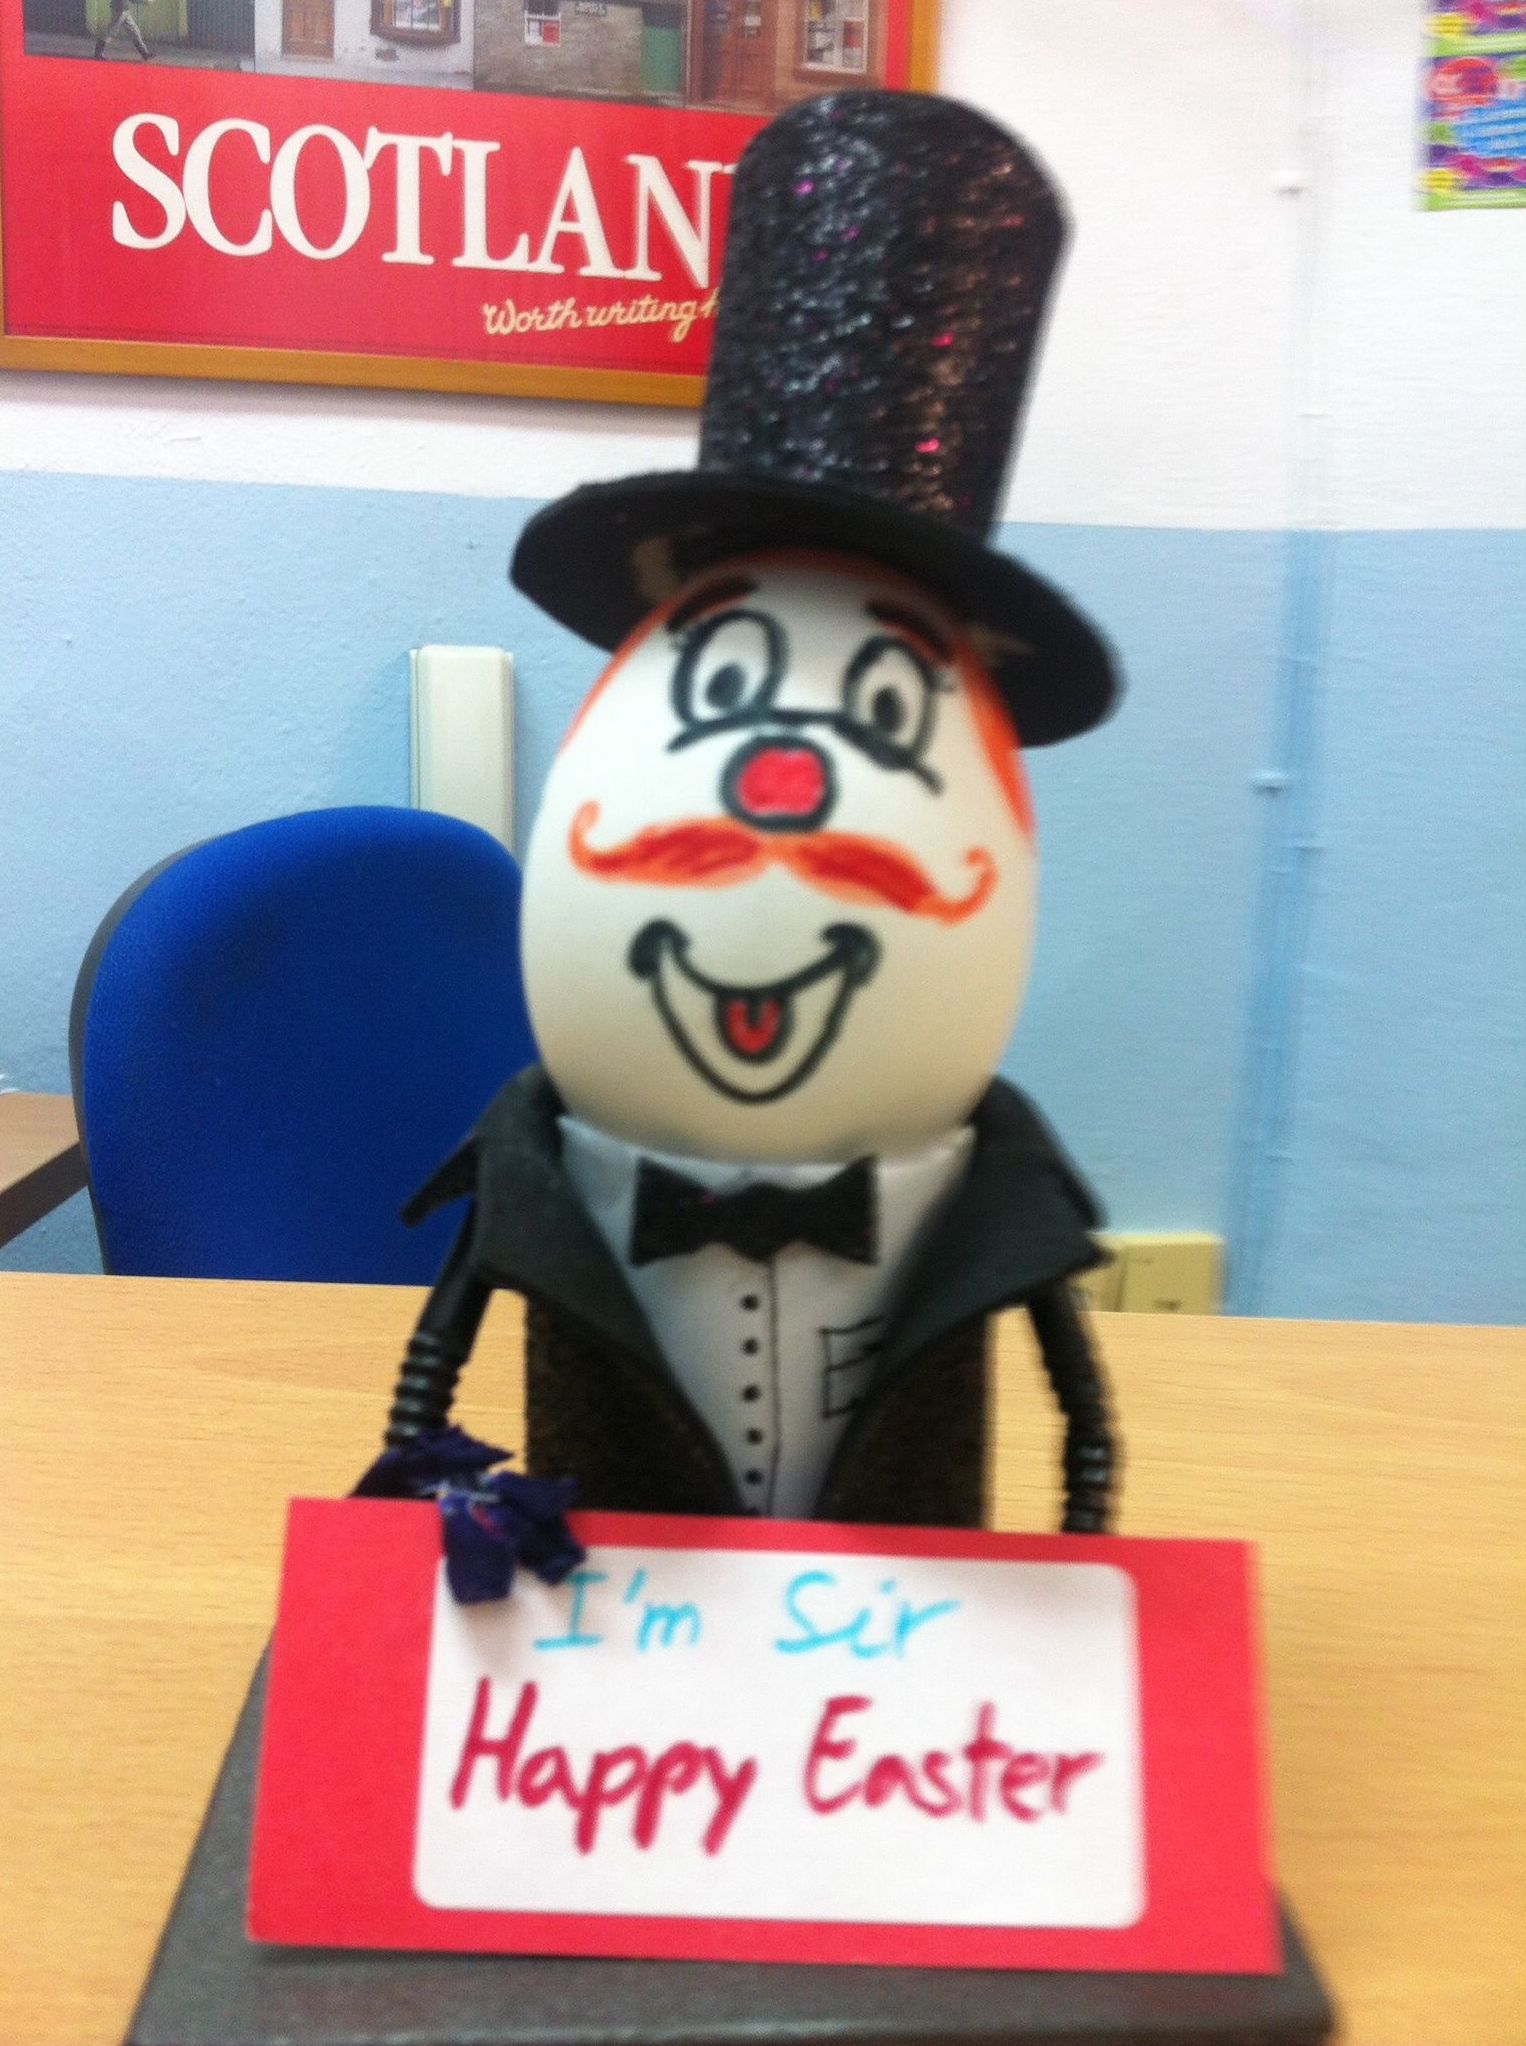 First prize winner:Easter Egg Competition